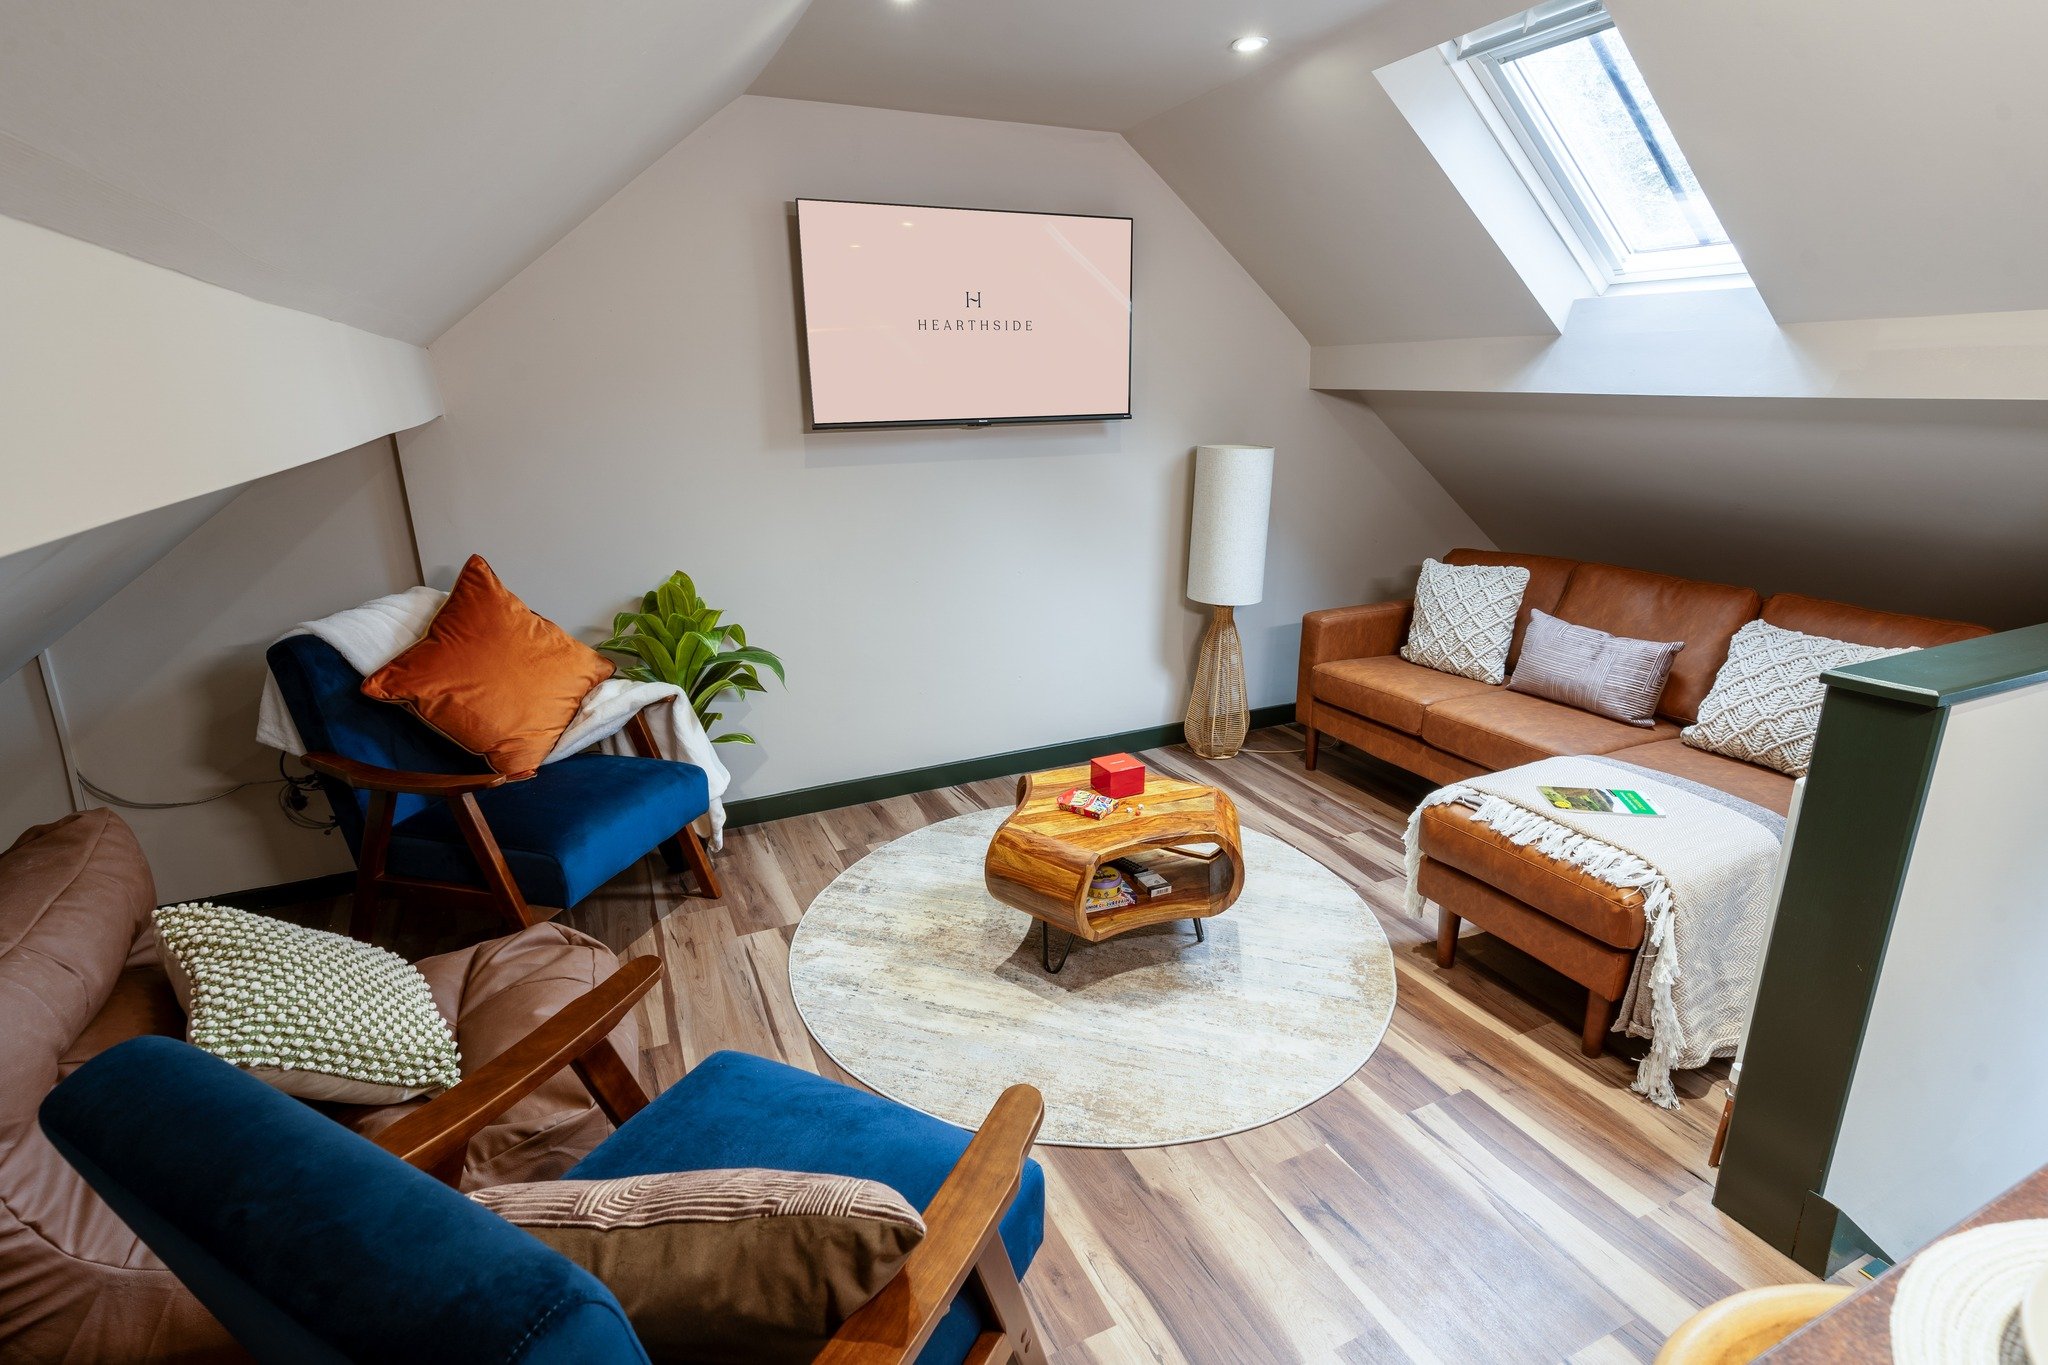 Relax, unwind and feel at home in our very comfy, family-friendly home - Lud's Snug, which features upside down living and includes a dedicated workspace if you need to work while away.🎲🍾

🔗 staywithhearthside.co.uk

#shorttermrental #derbyshire #